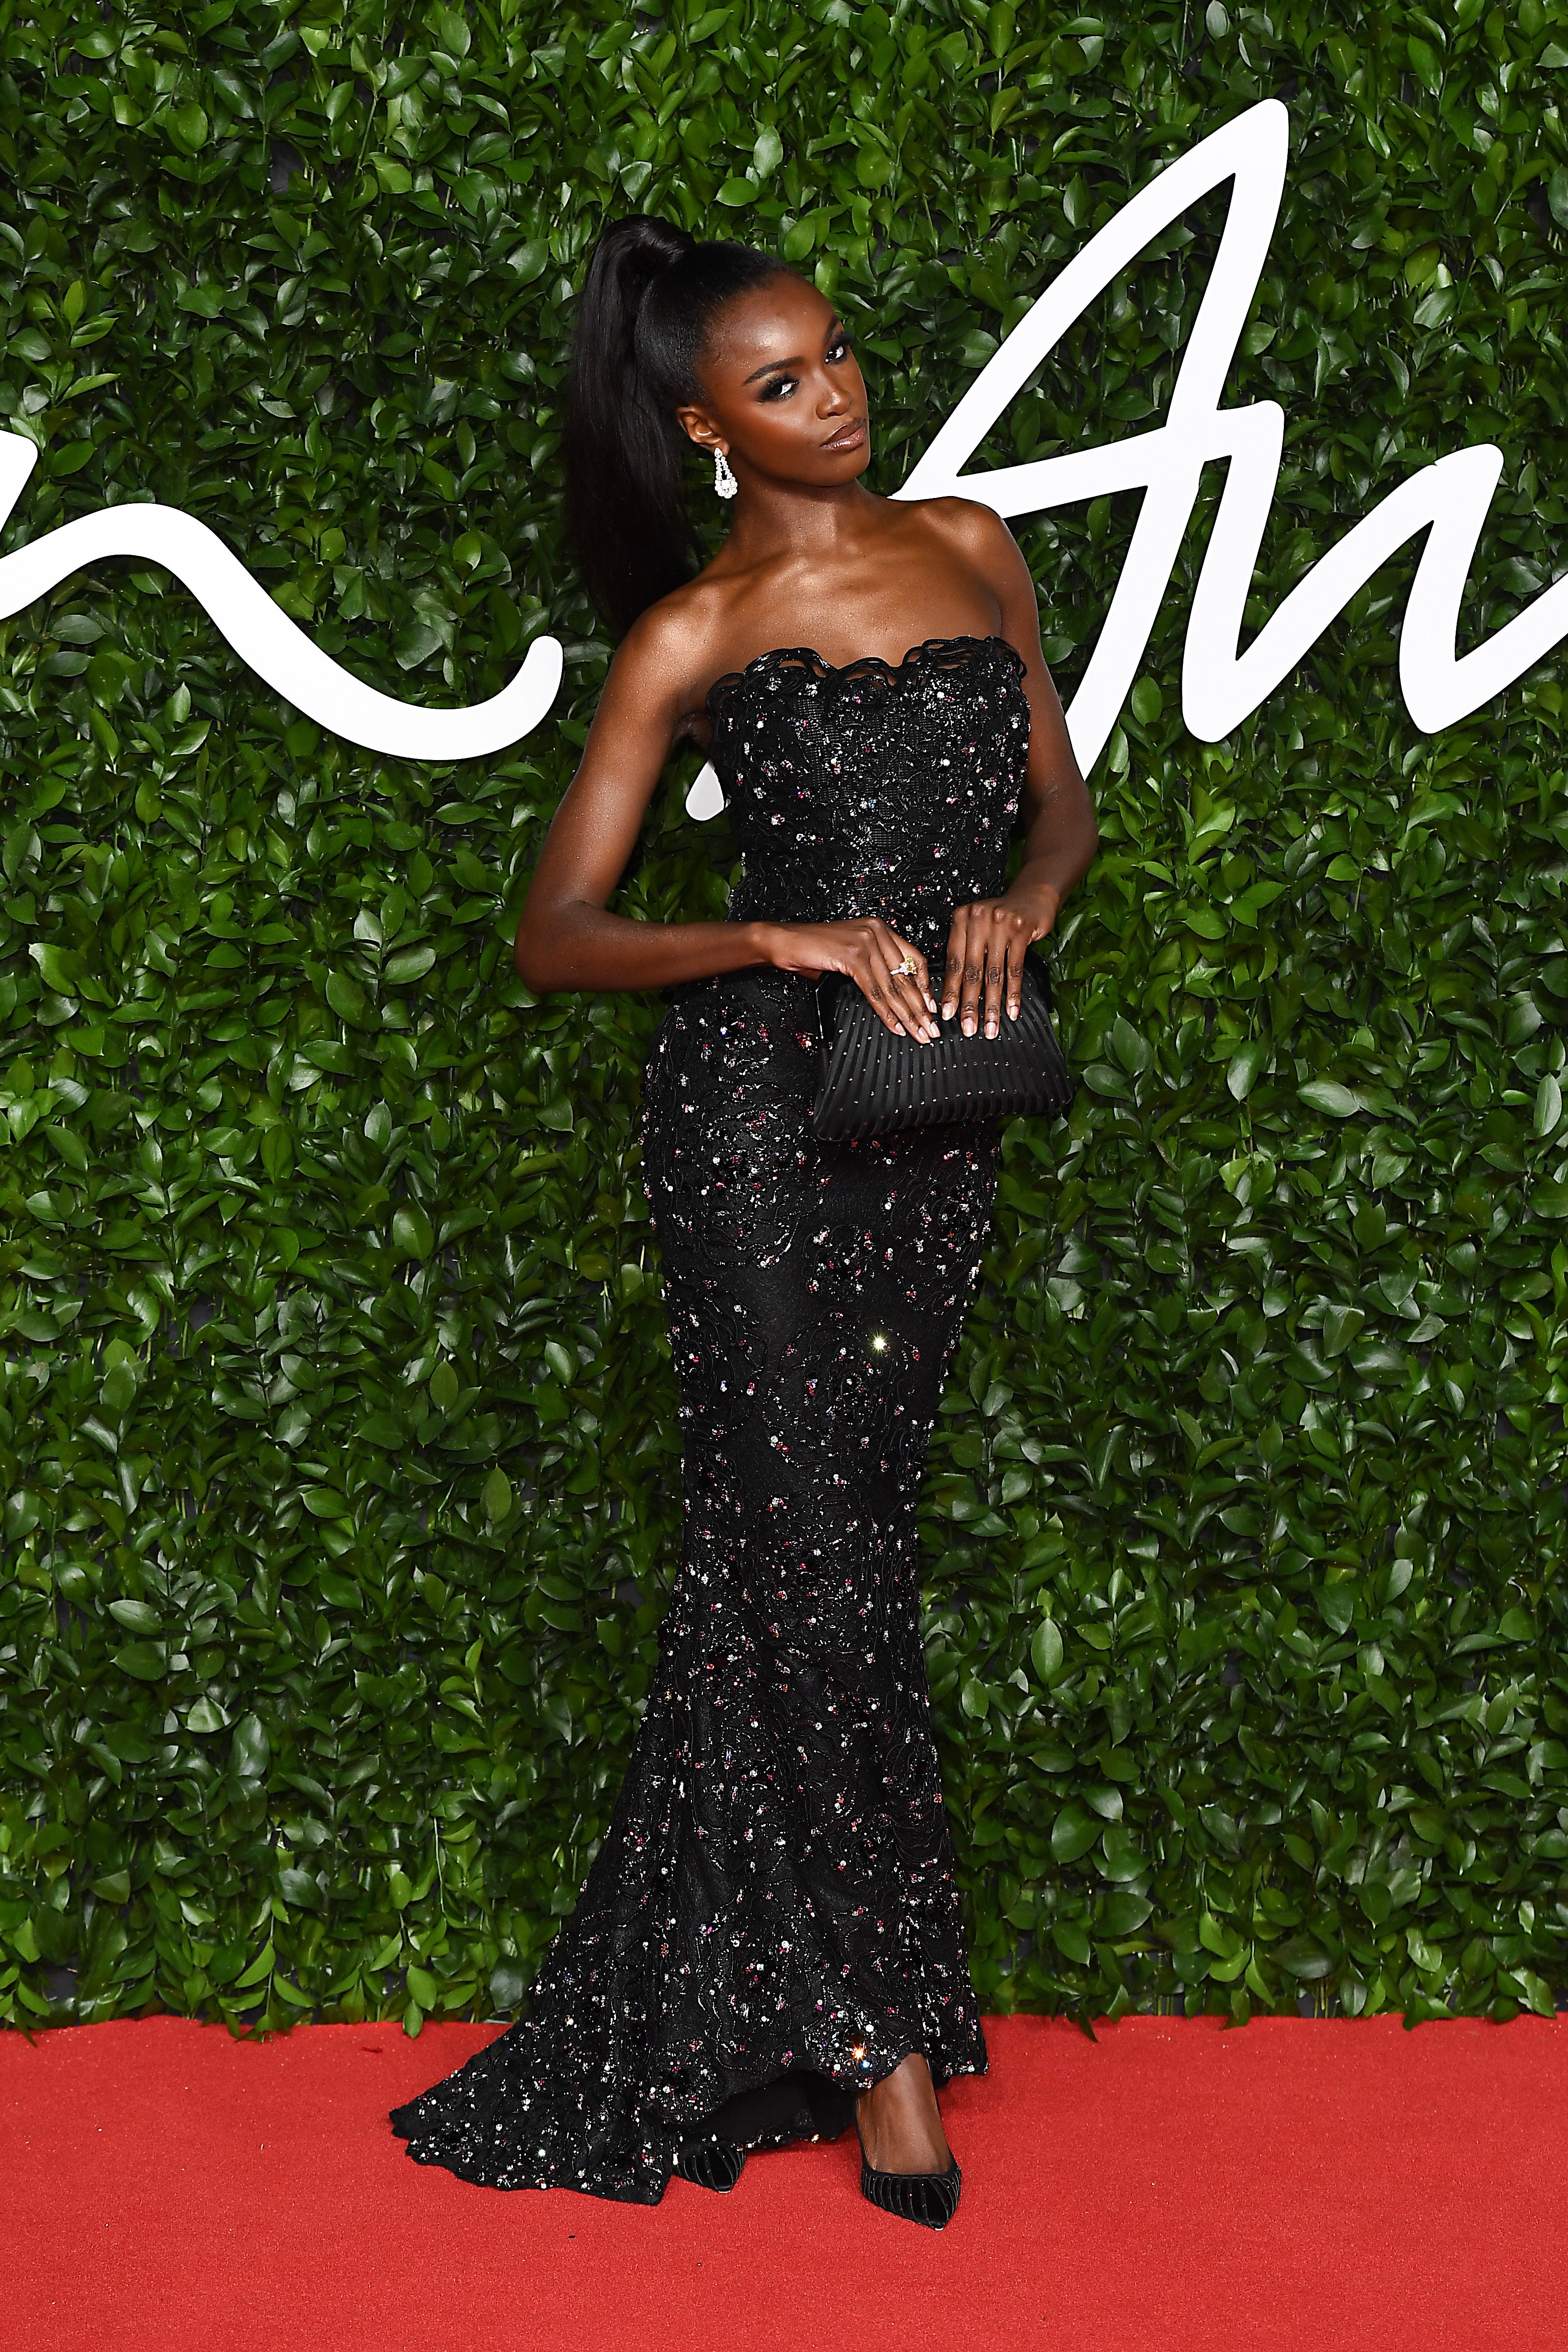 The Best Red-Carpet Looks At The 2019 Fashion Awards